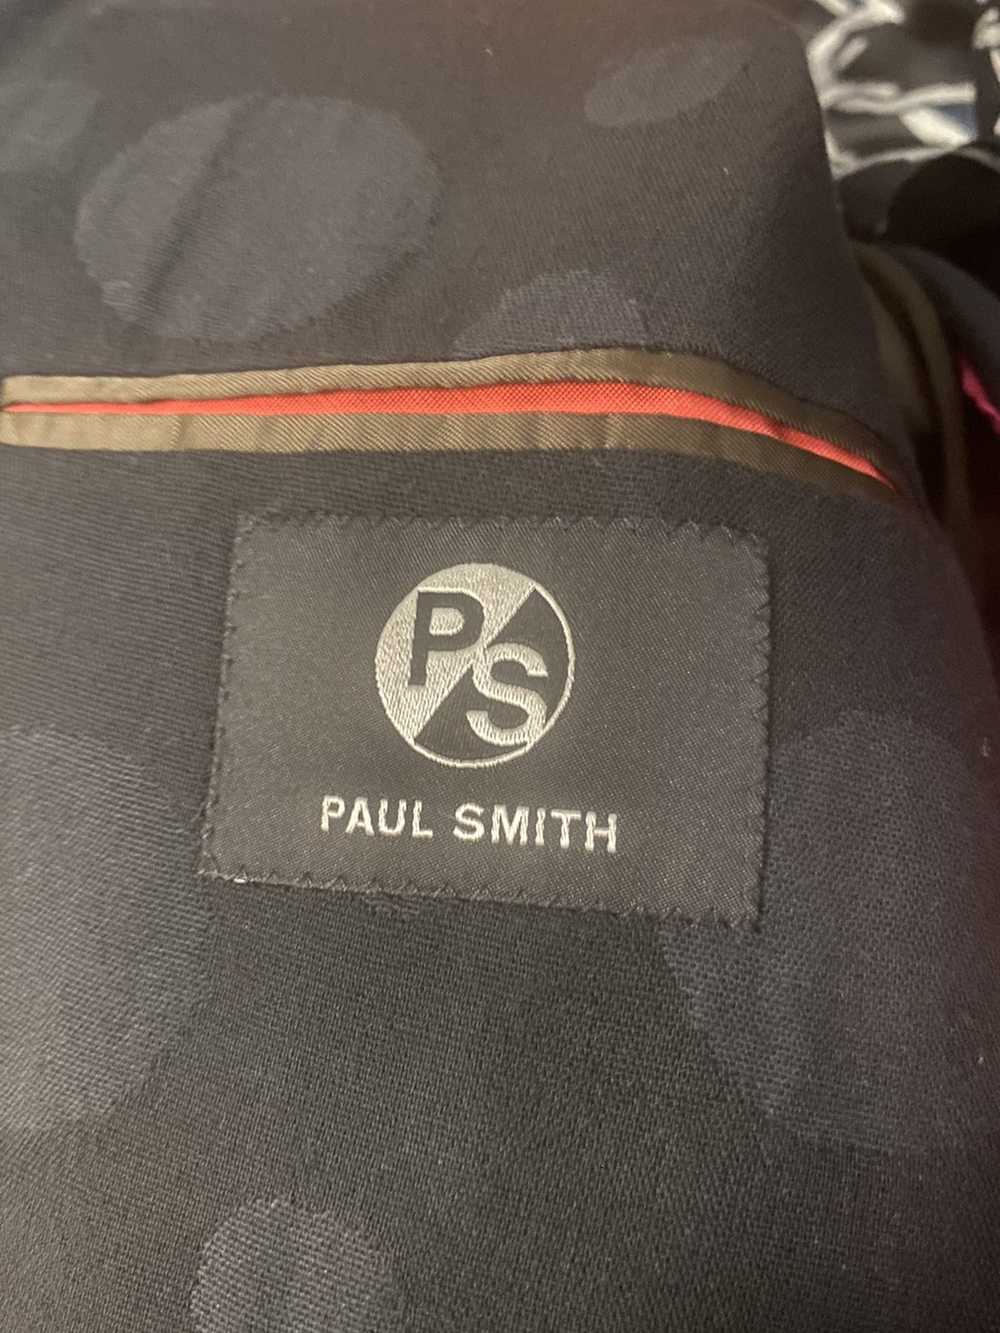 Paul Smith Paul Smith Gents Jacket Buggy Lined Bl… - image 4